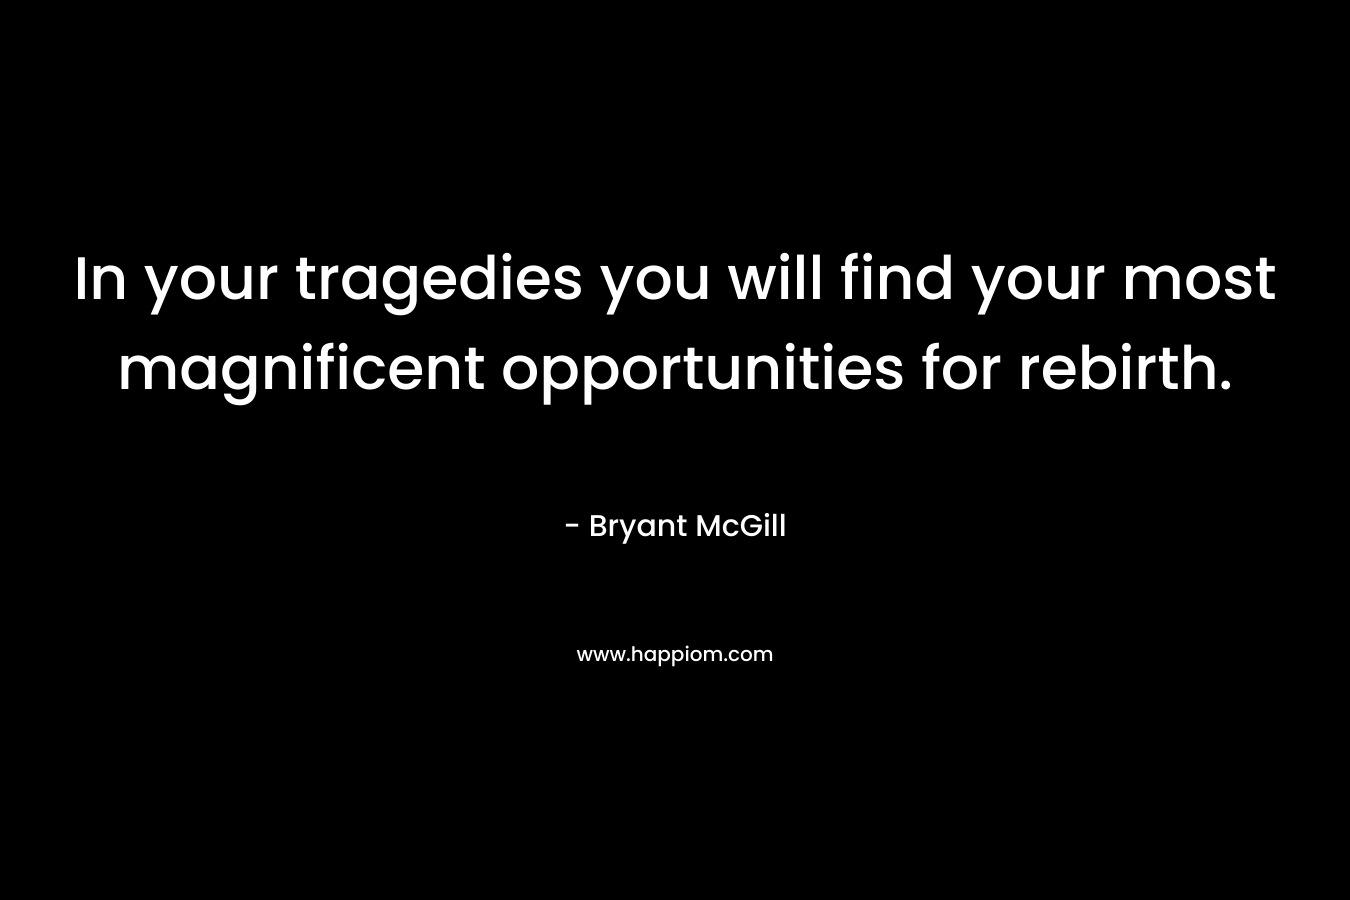 In your tragedies you will find your most magnificent opportunities for rebirth. – Bryant McGill